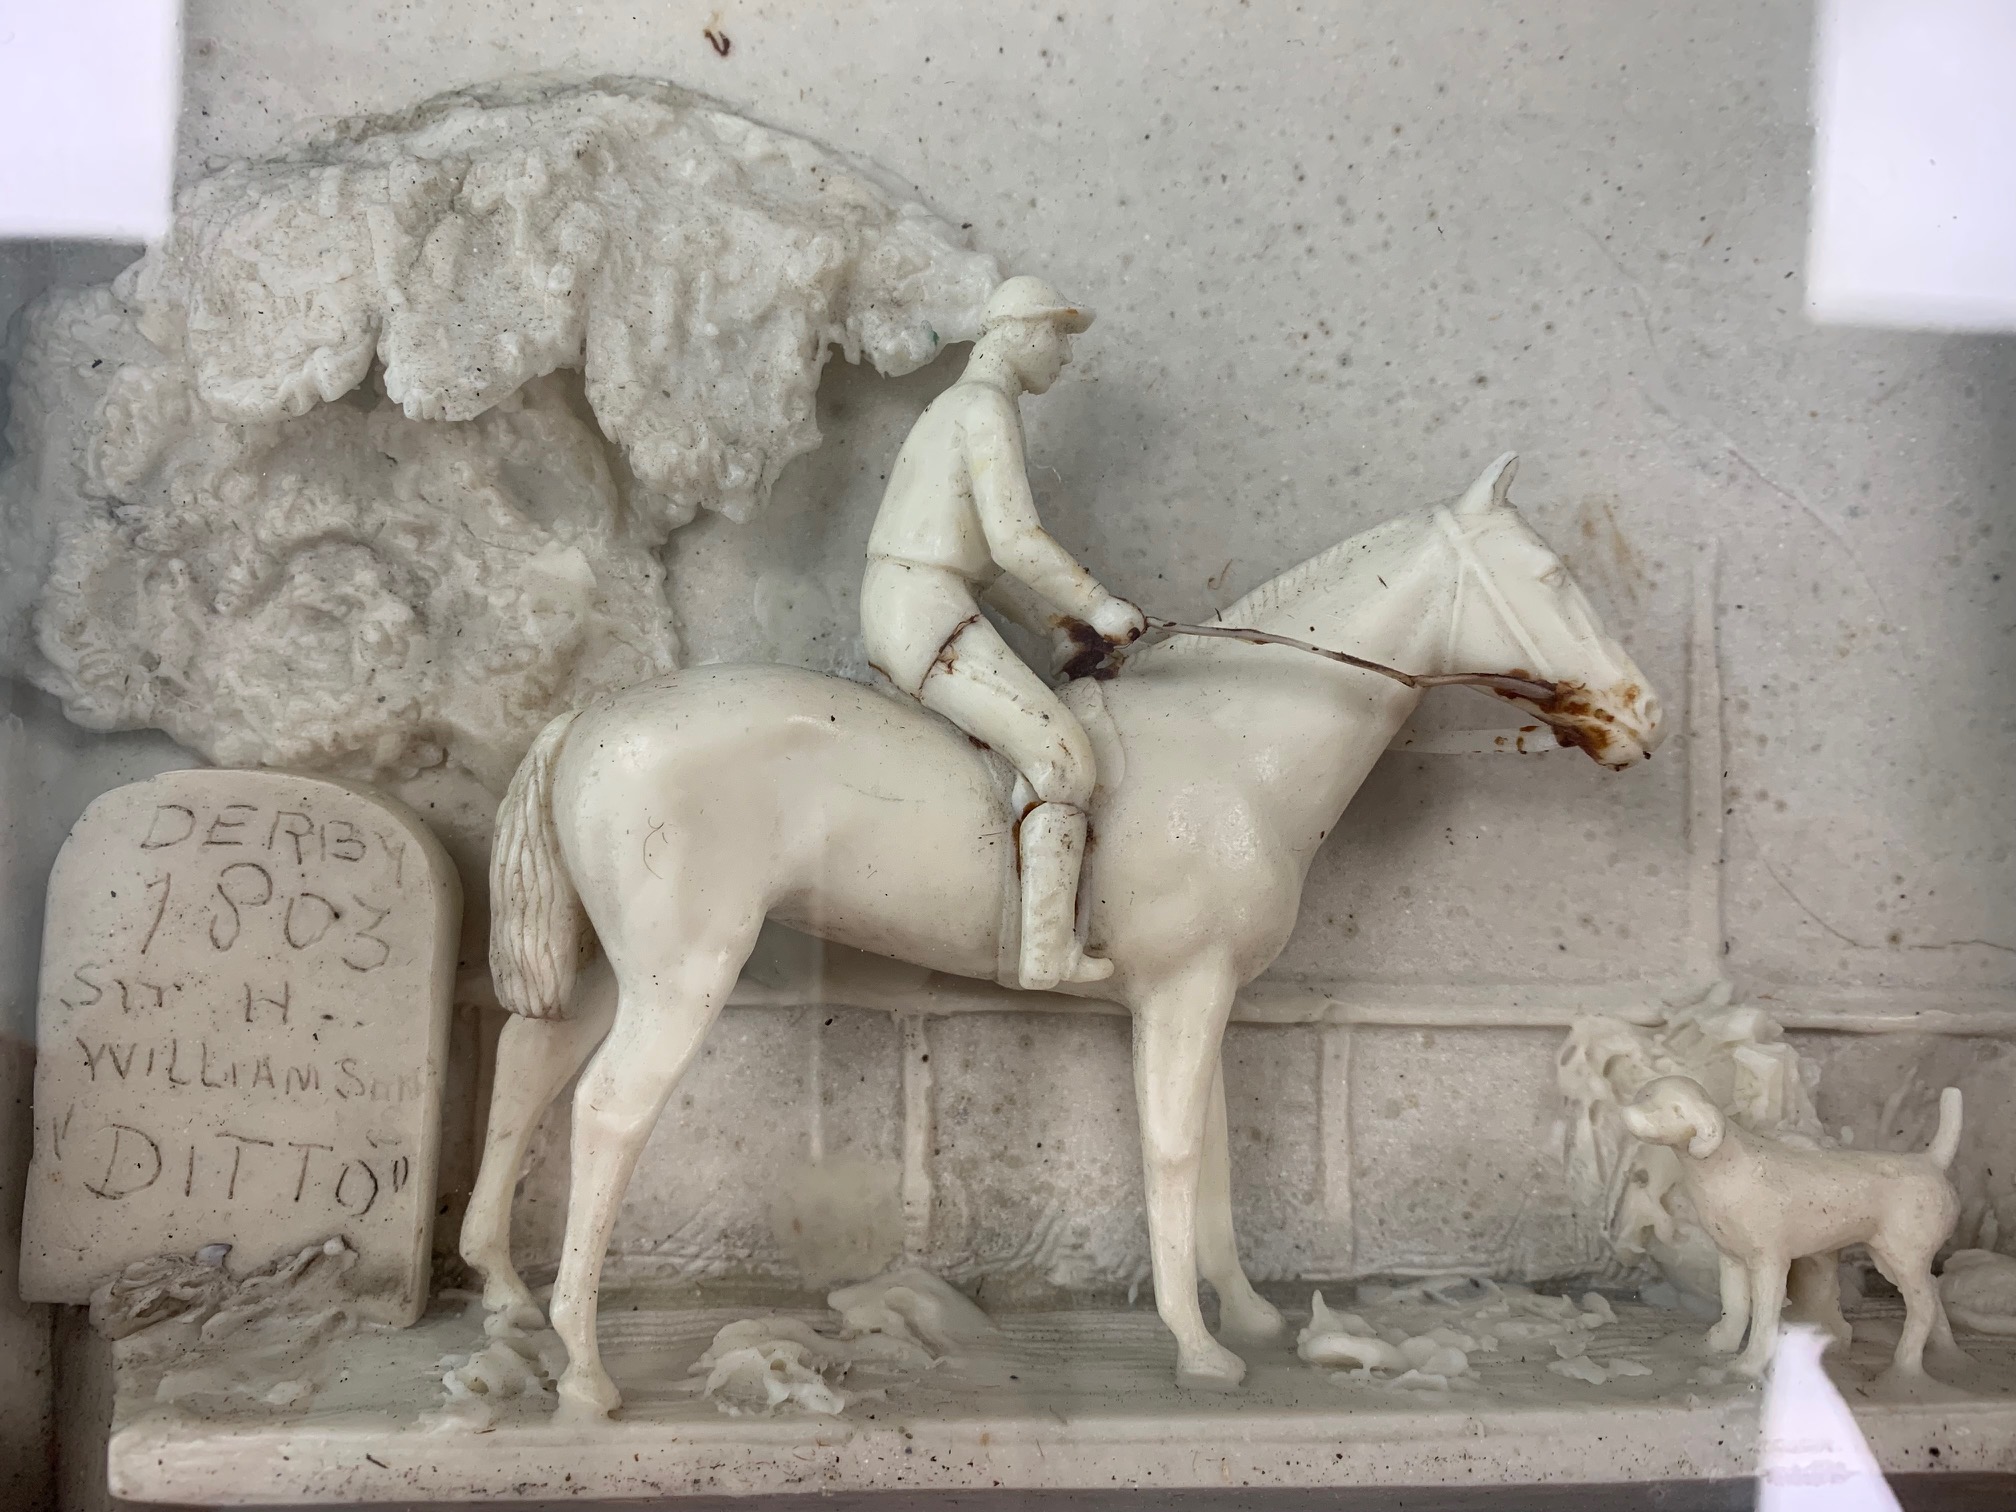 A Regency period wax diorama of the Derby Winner 'Ditto', 1803 - Image 3 of 3